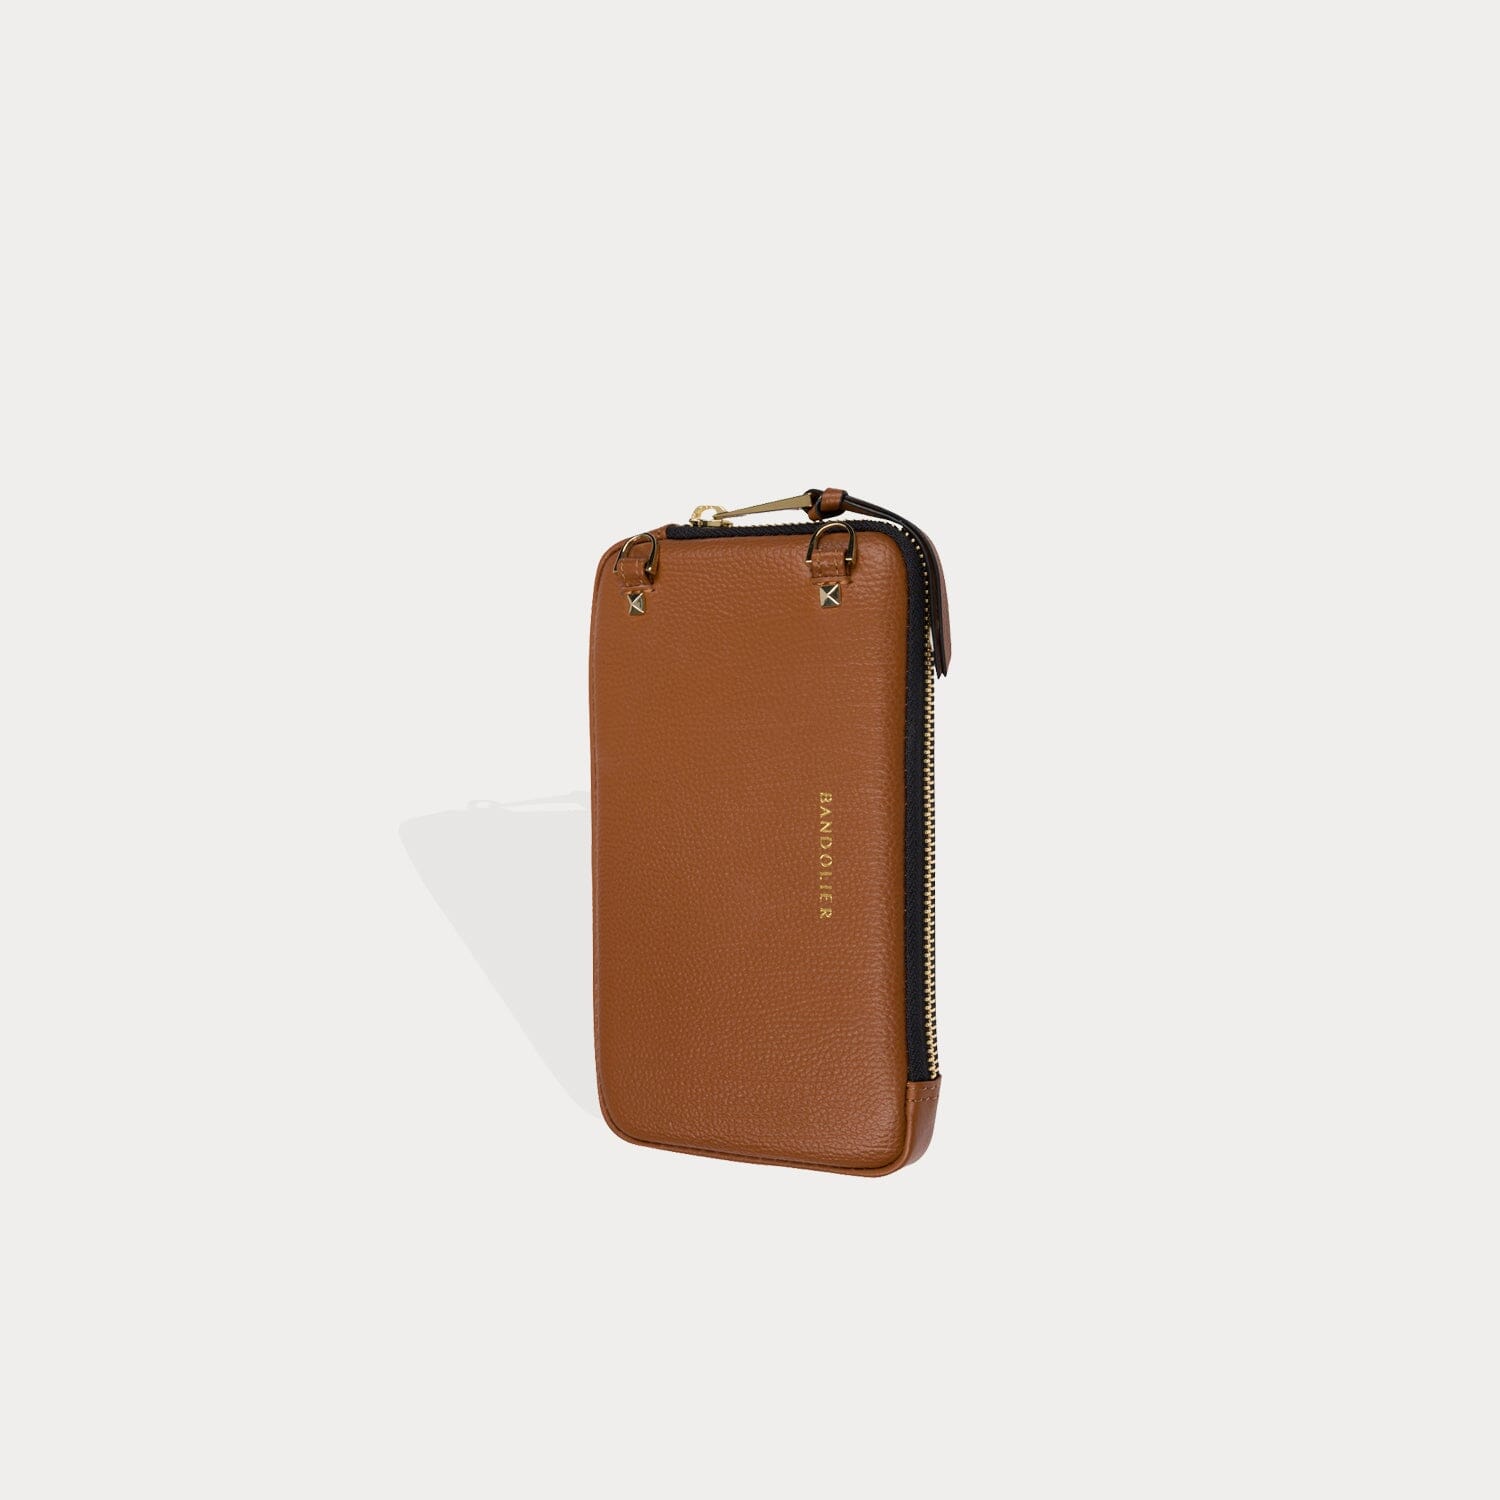 Pebble Leather Expanded Zip Pouch - Sienna/Gold